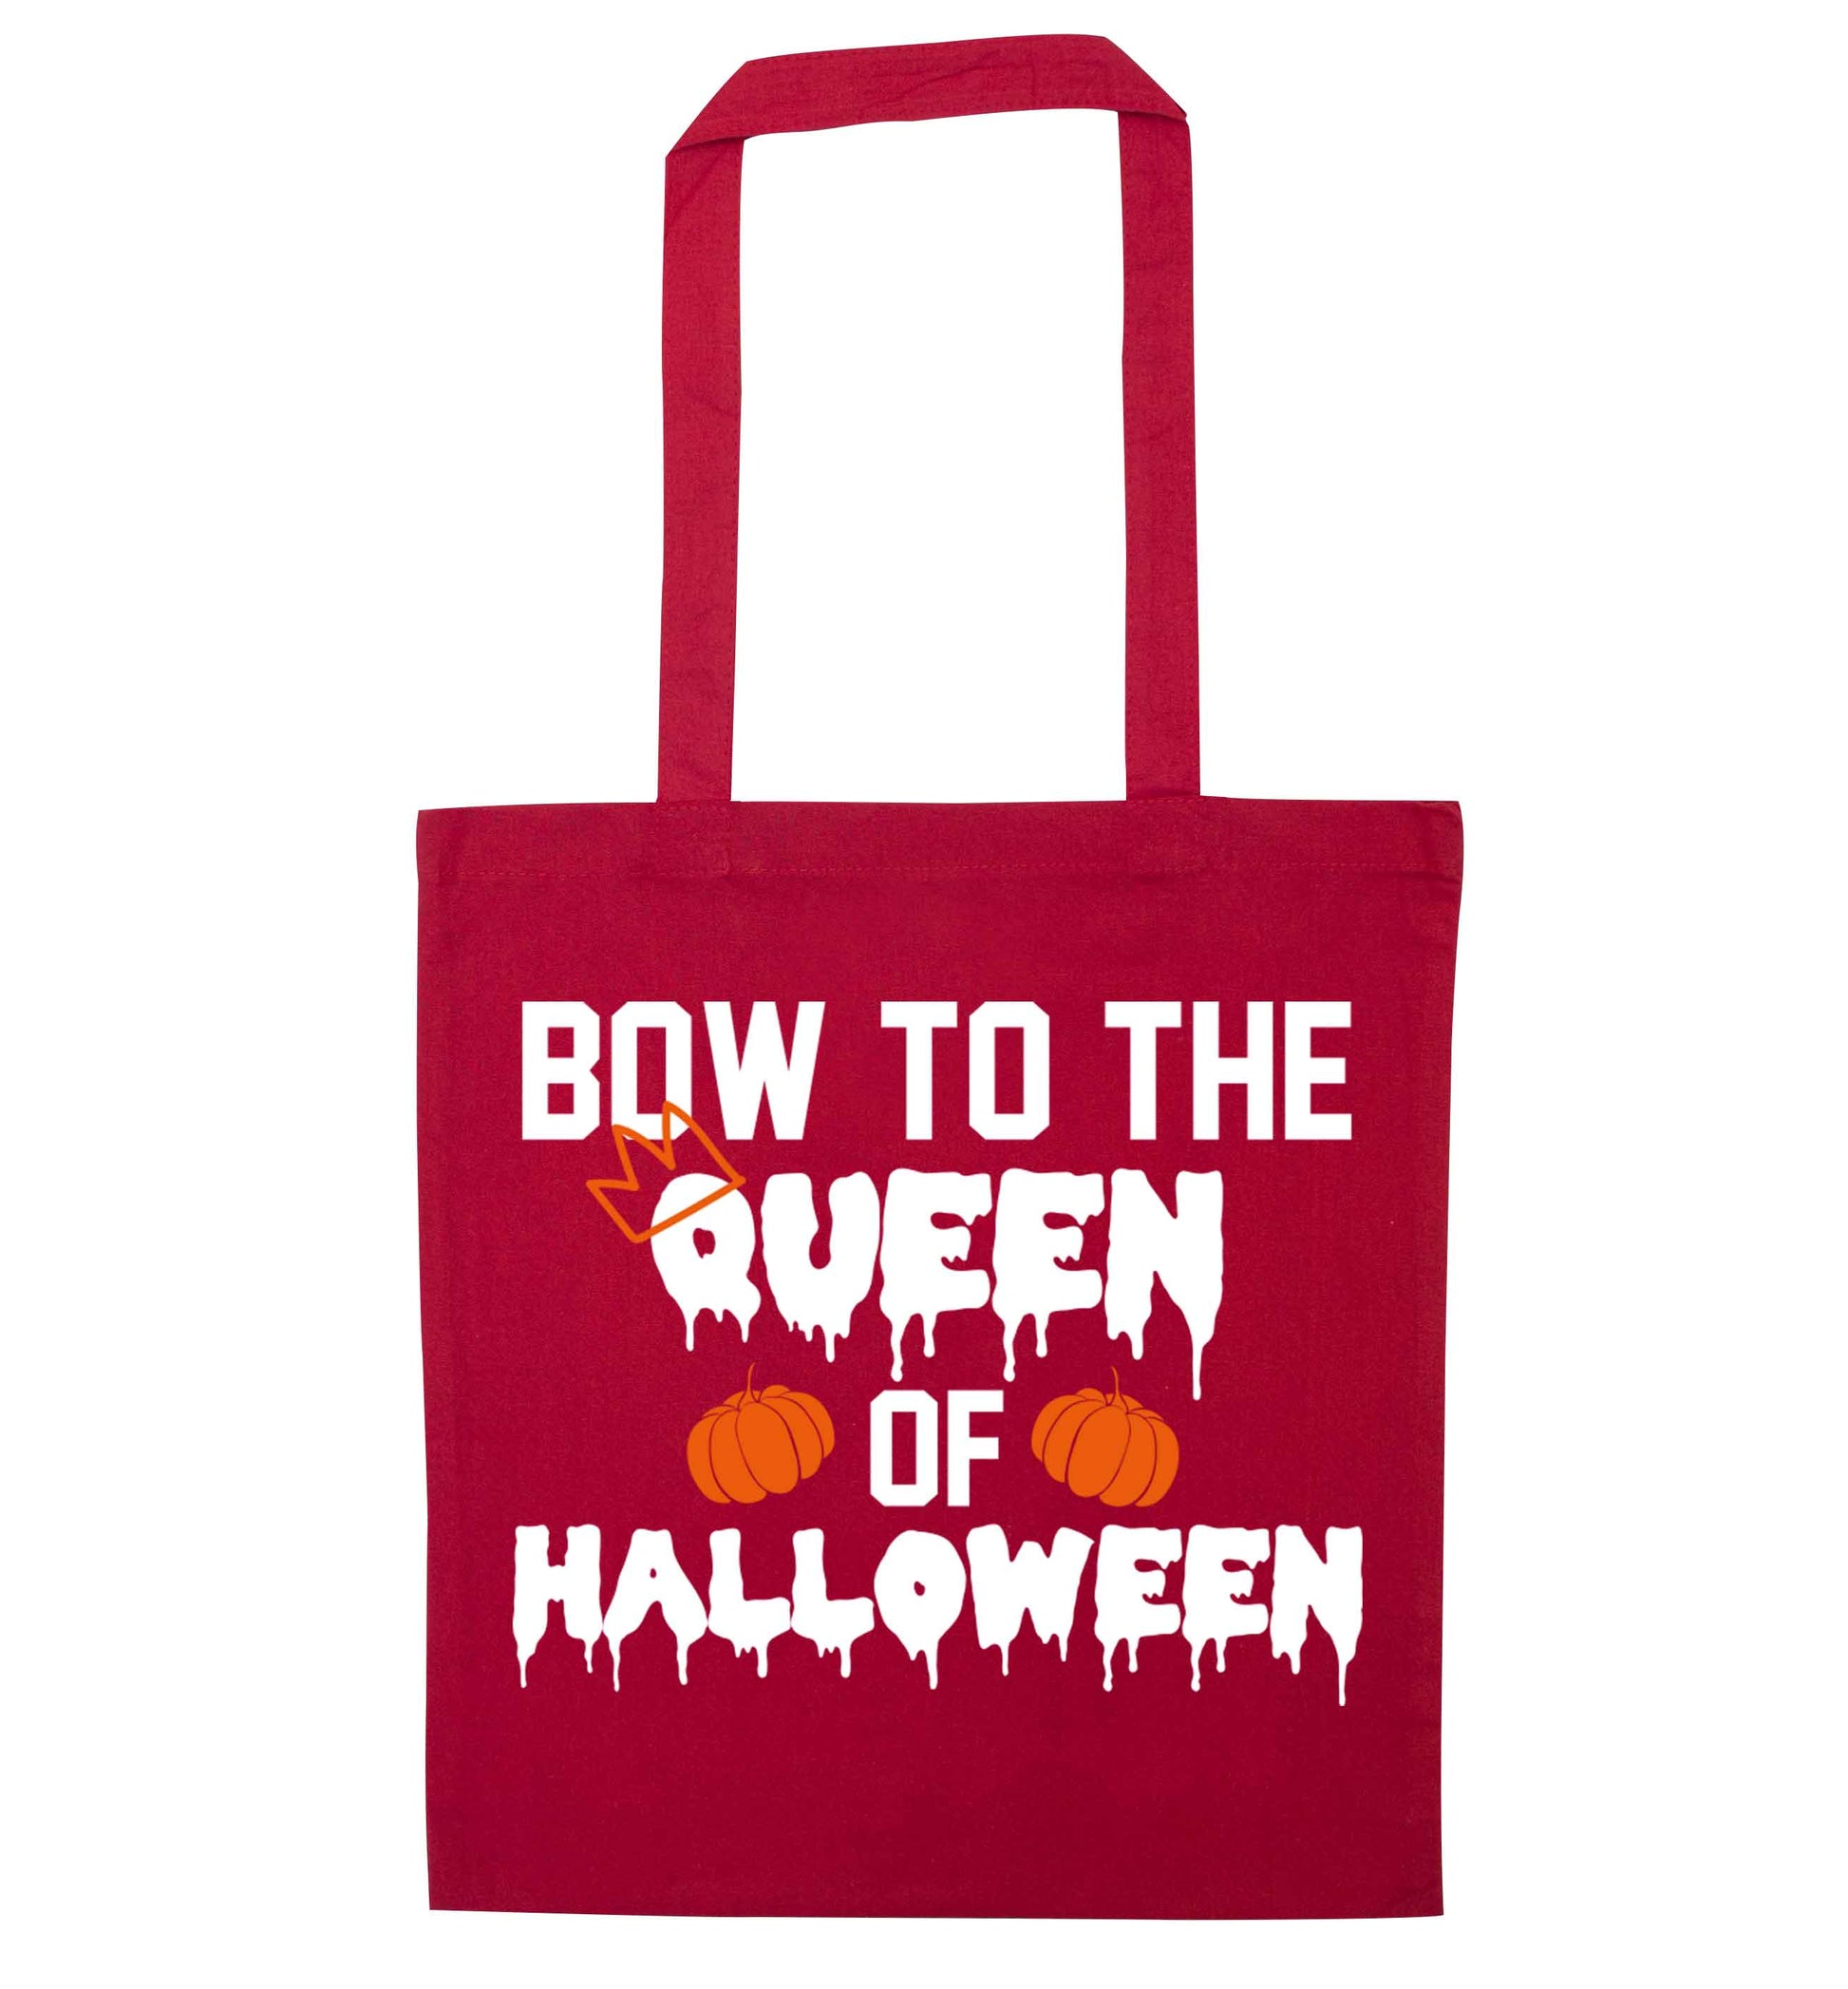 Bow to the Queen of halloween red tote bag